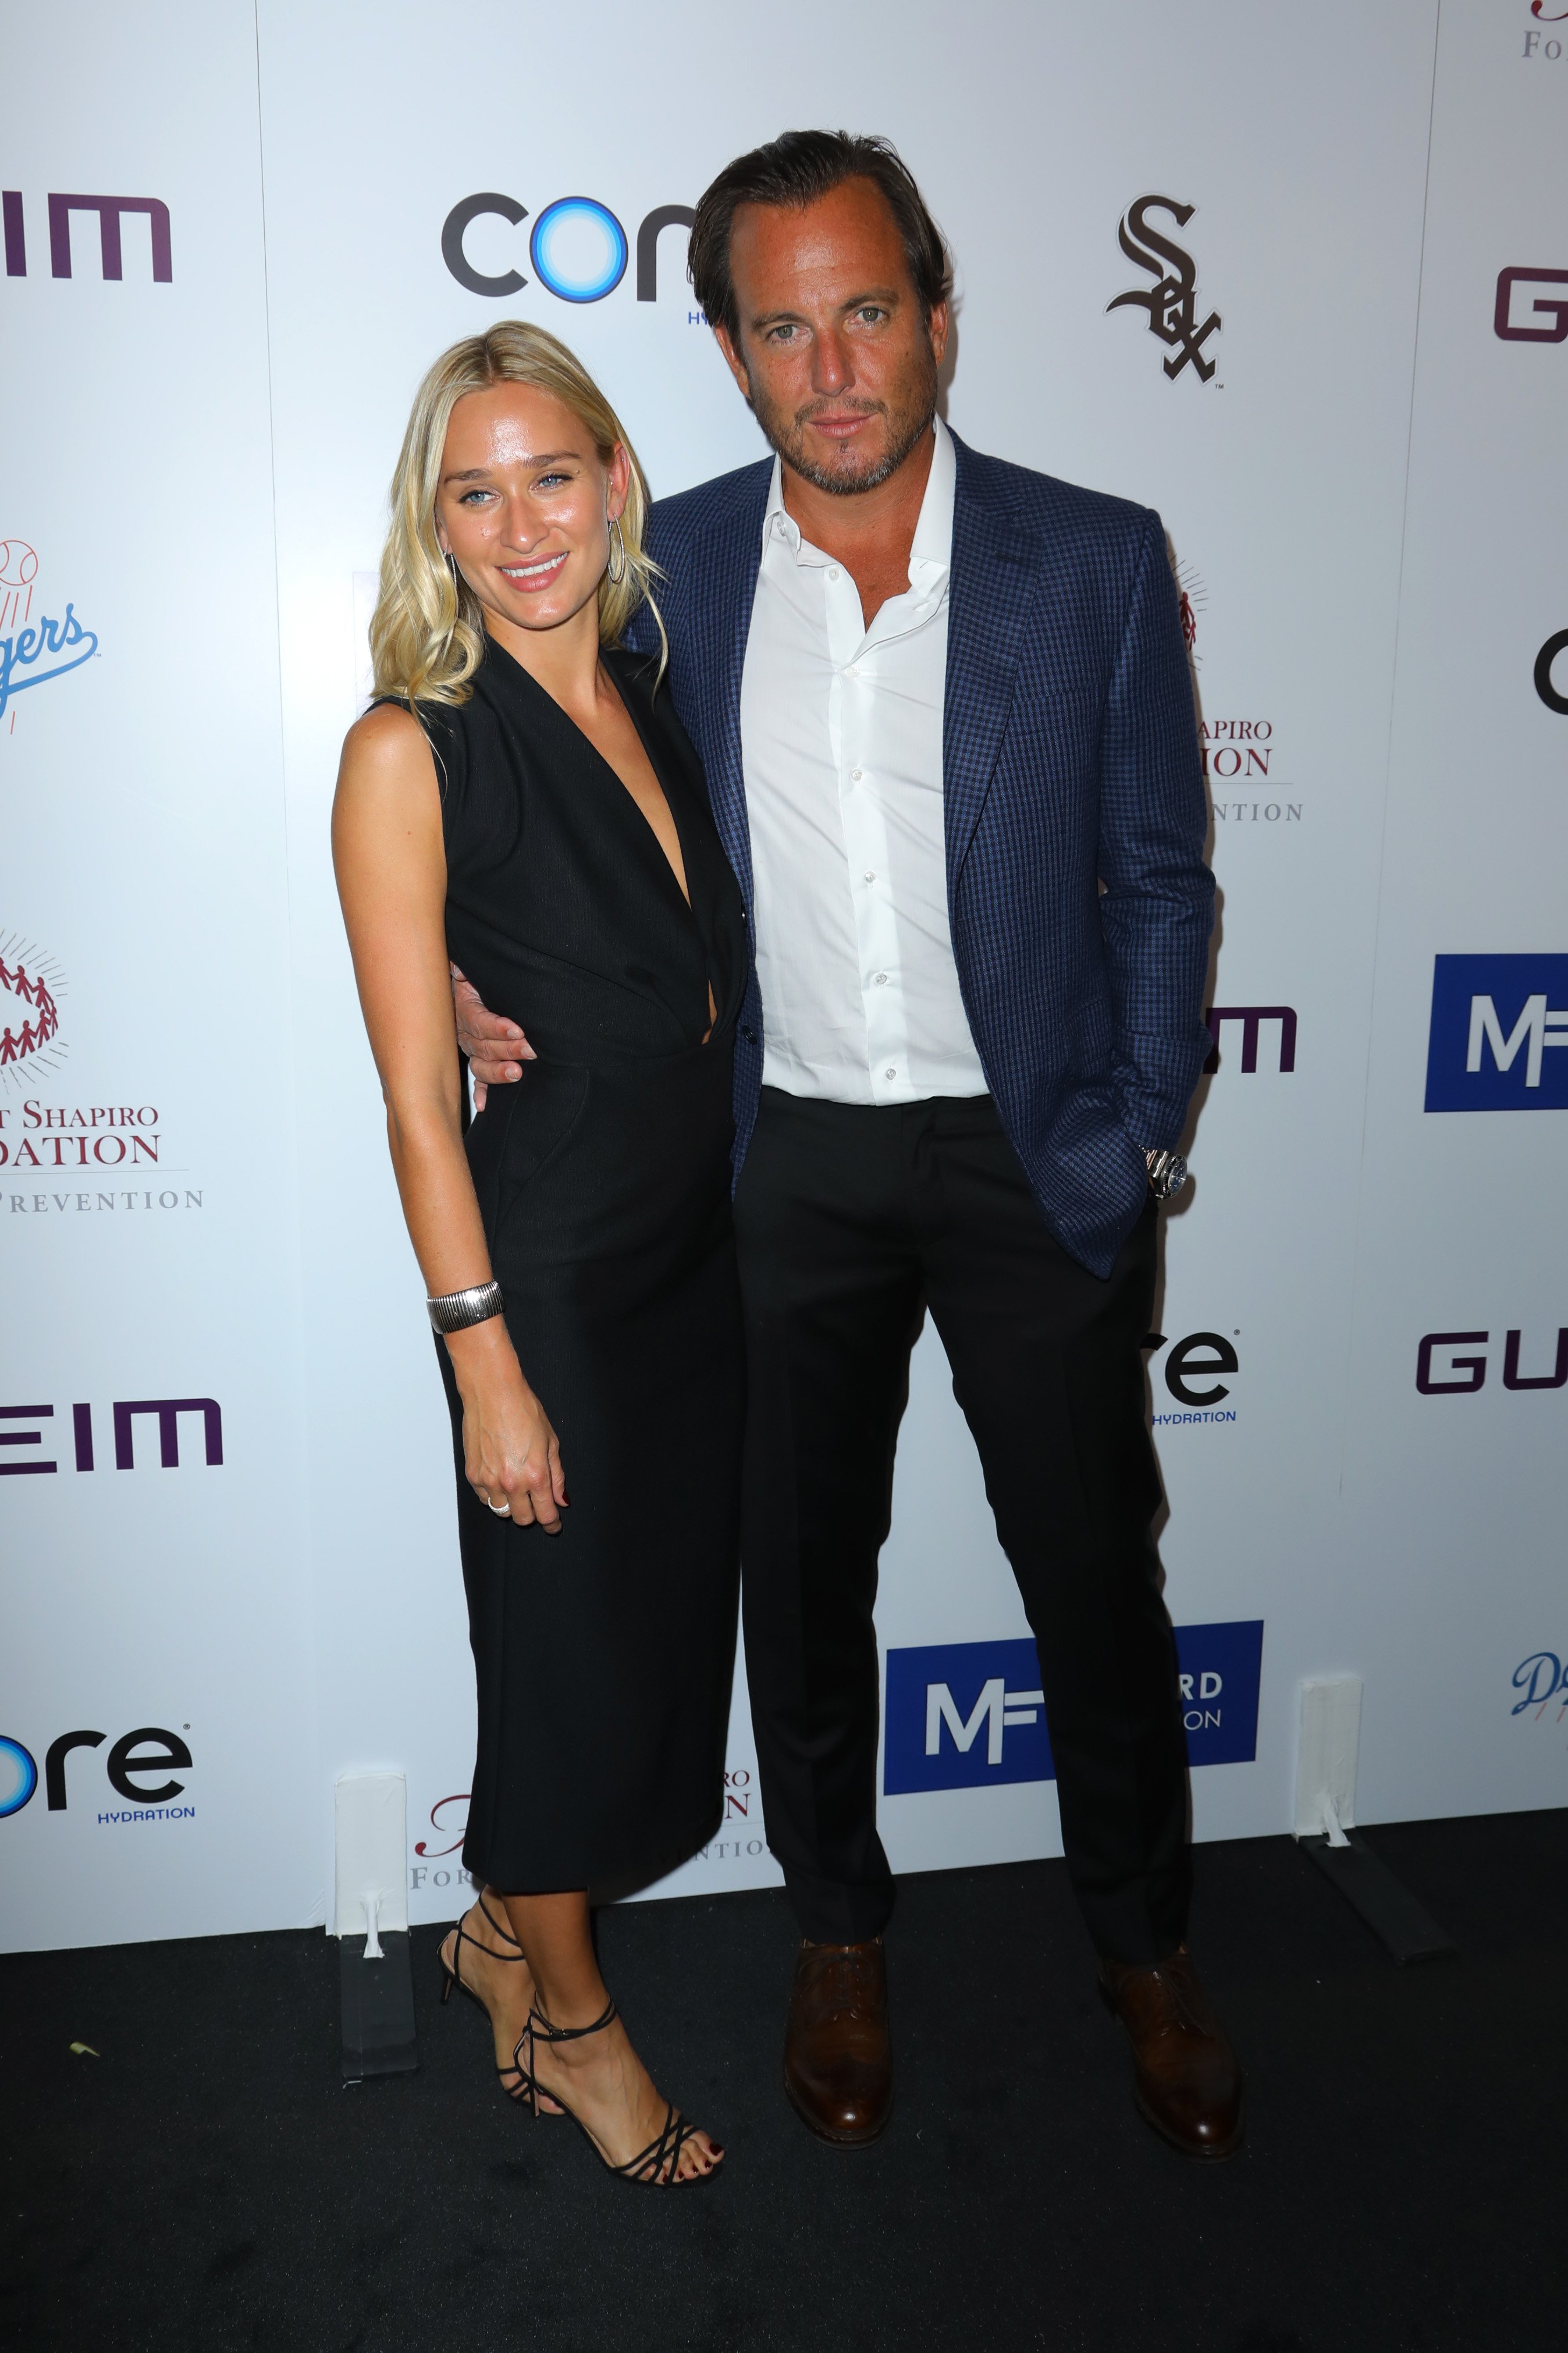 Alessandra Brawn and Will Arnett at The Brent Shapiro Foundation for Drug Prevention Summer Spectacular Gala on September 21, 2019, in California. | Source: Getty Images